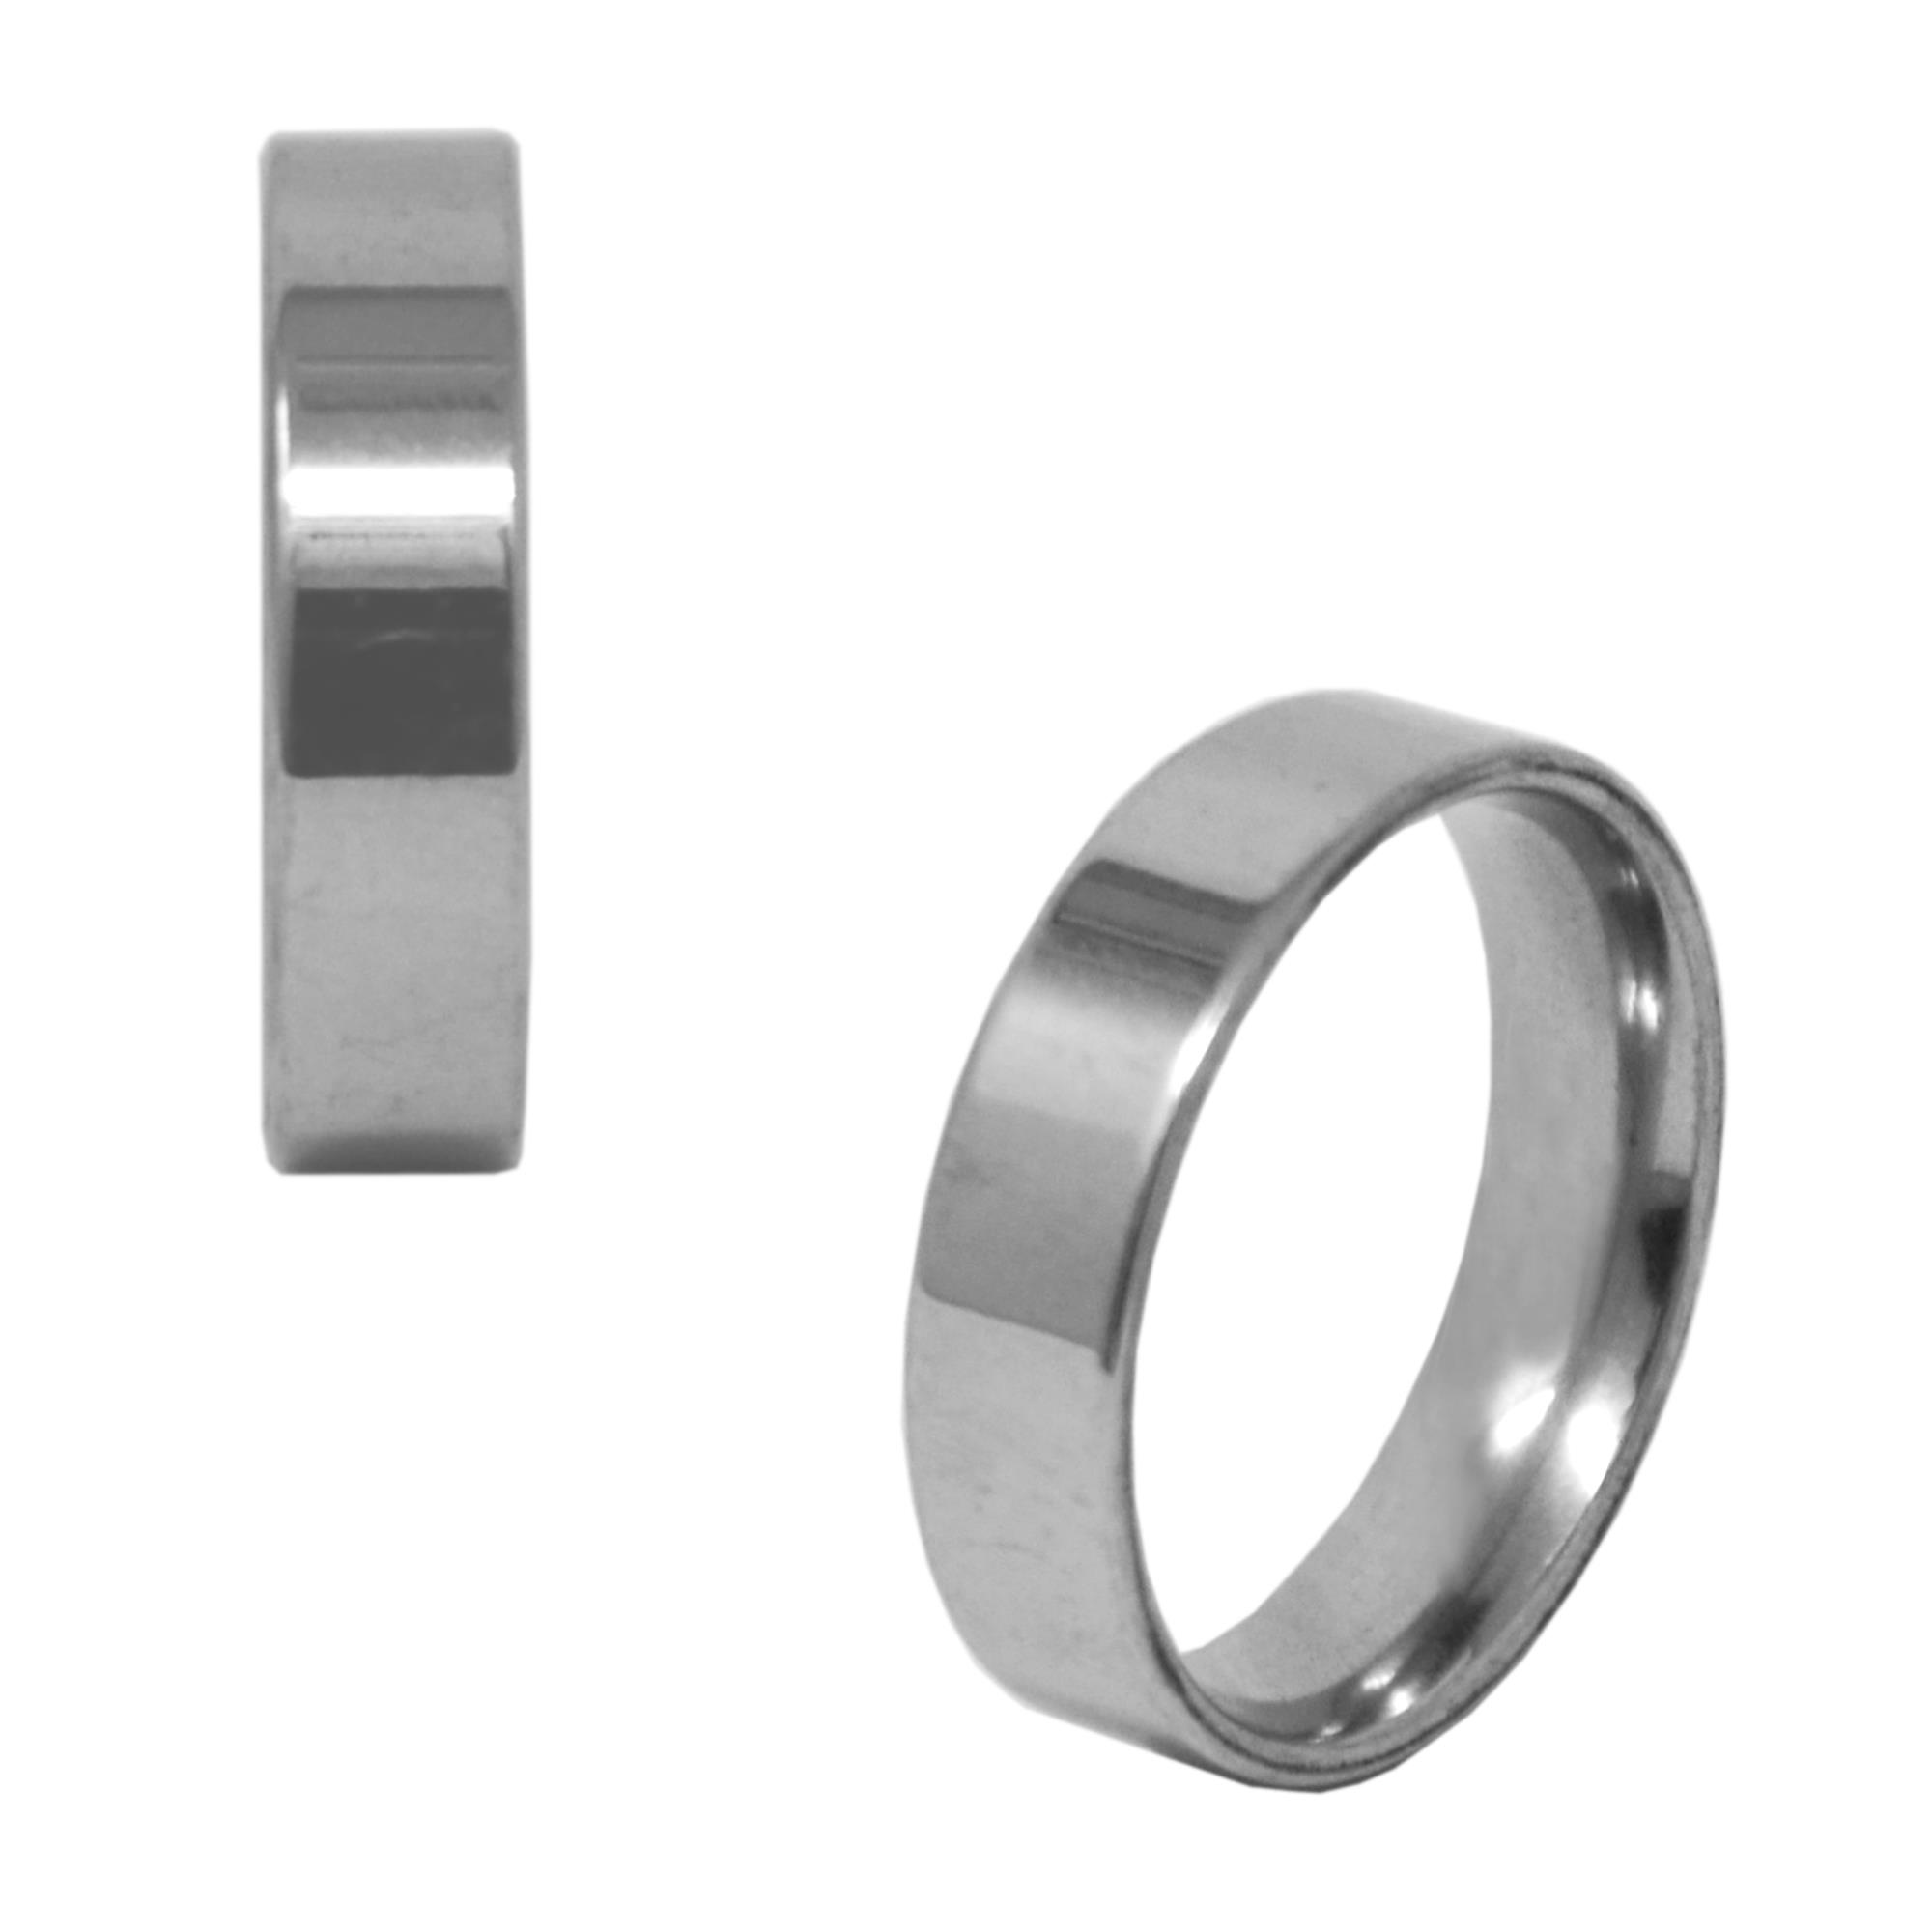 STAINLESS STEEL FLAT RING